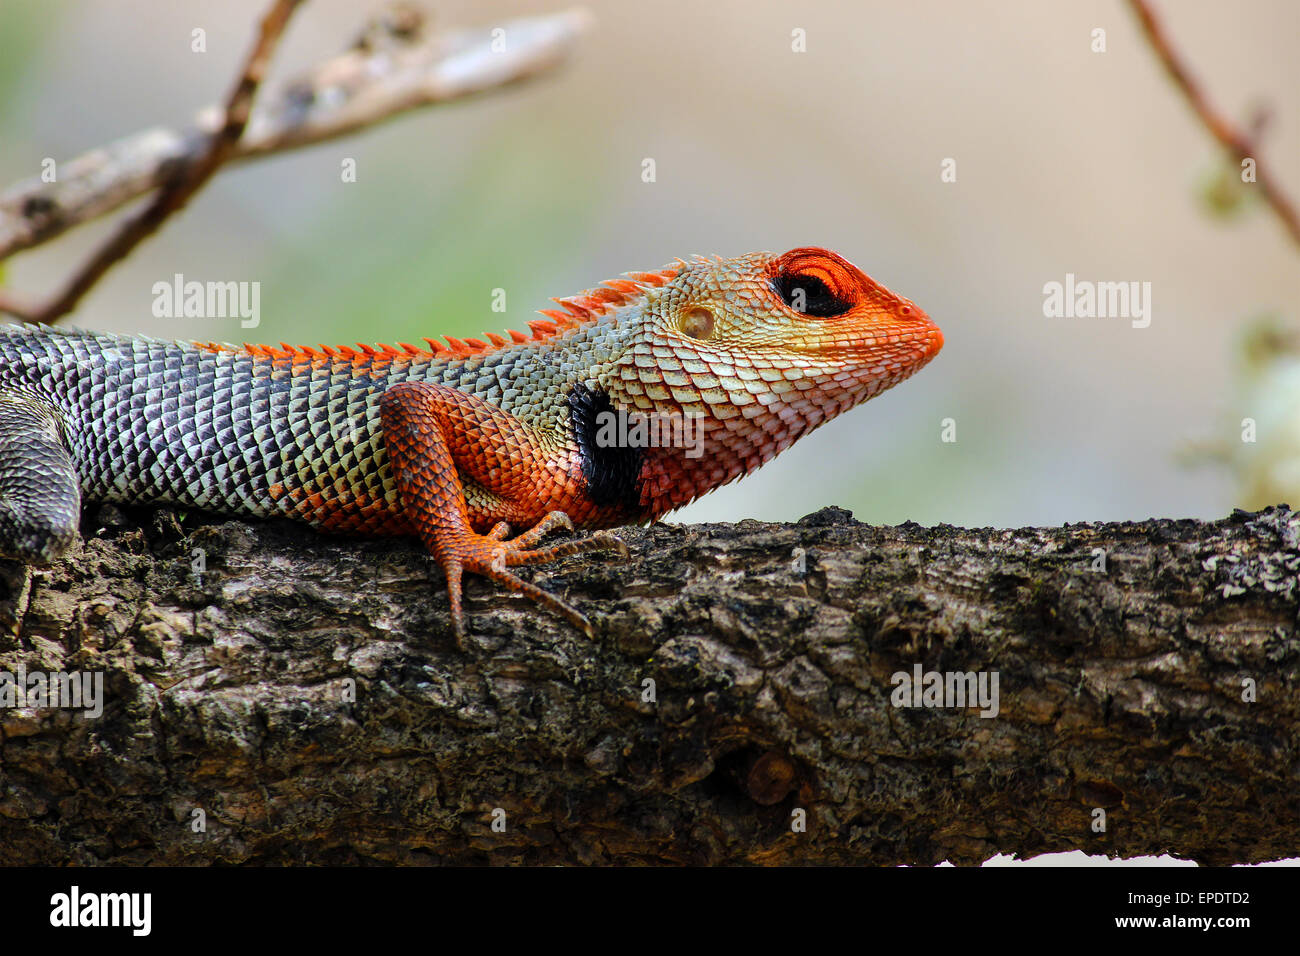 animal, animals, branch, reptile, reptiles, life, cold blooded, sharp, nails, wild life, forest, jungle, resting, climbing, color, eyes, Stock Photo